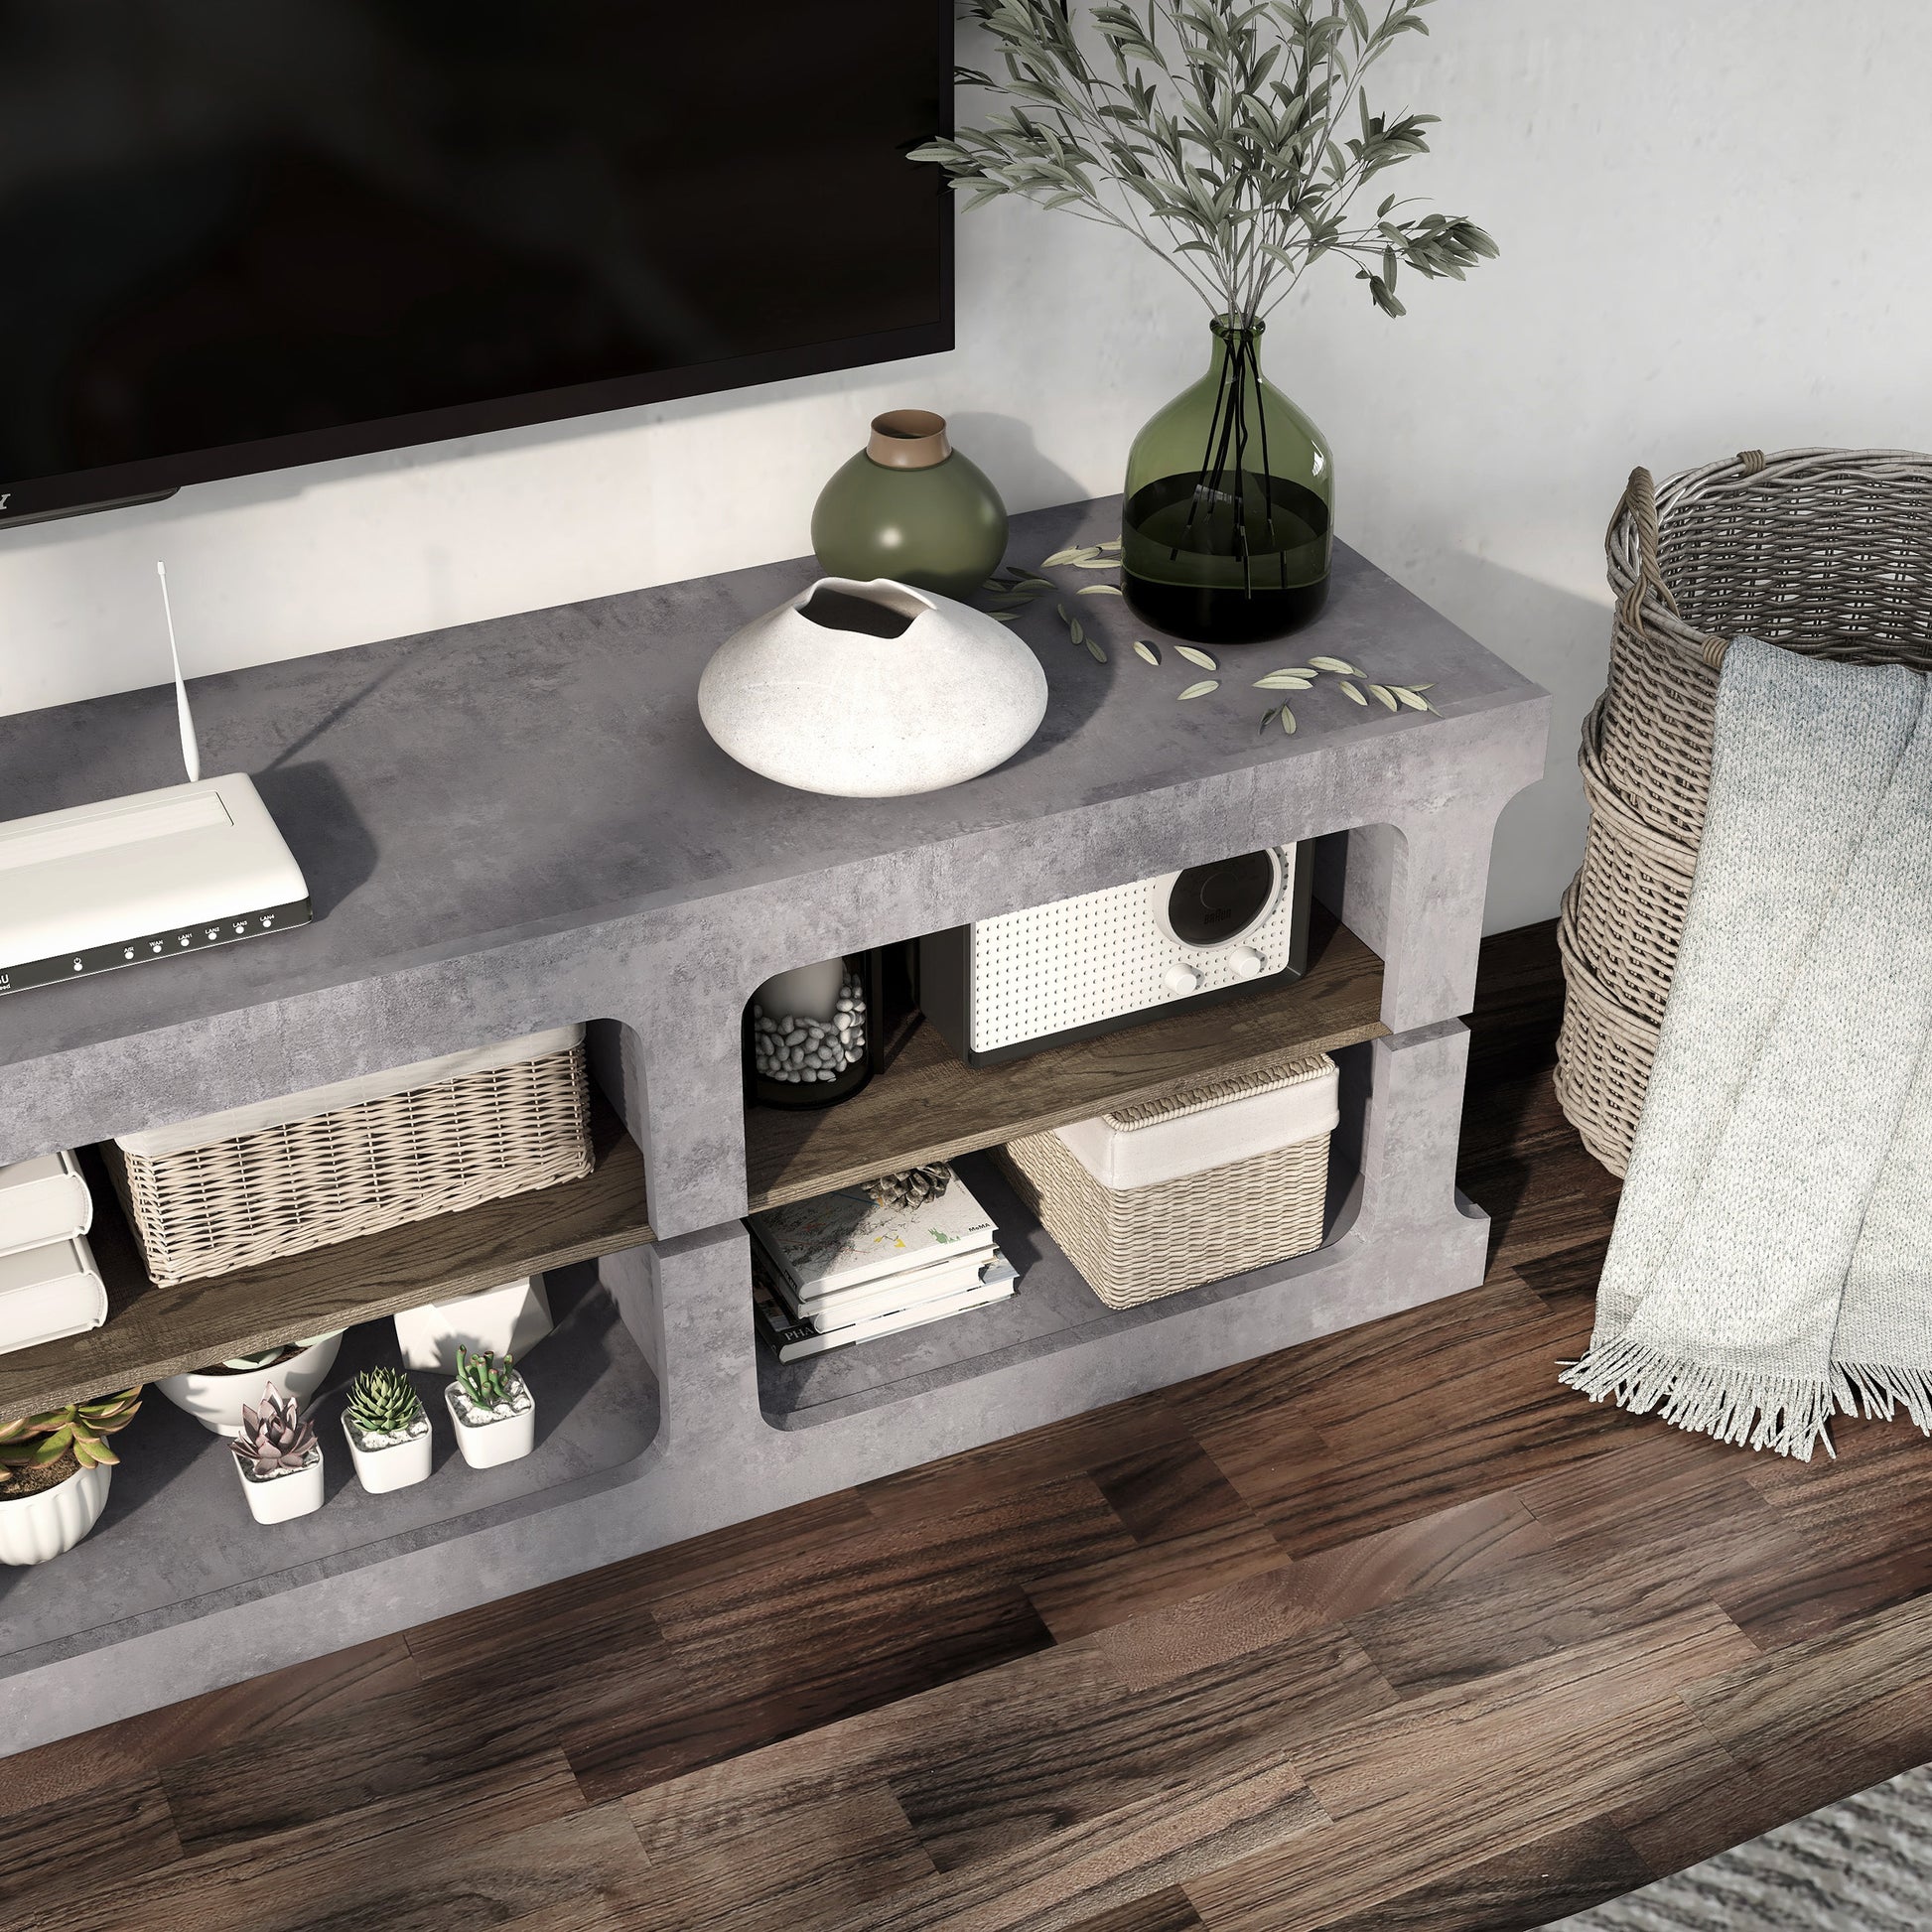 Right angled bird's eye close-up view of an industrial cement and wood six-shelf TV stand in a living area with accessories